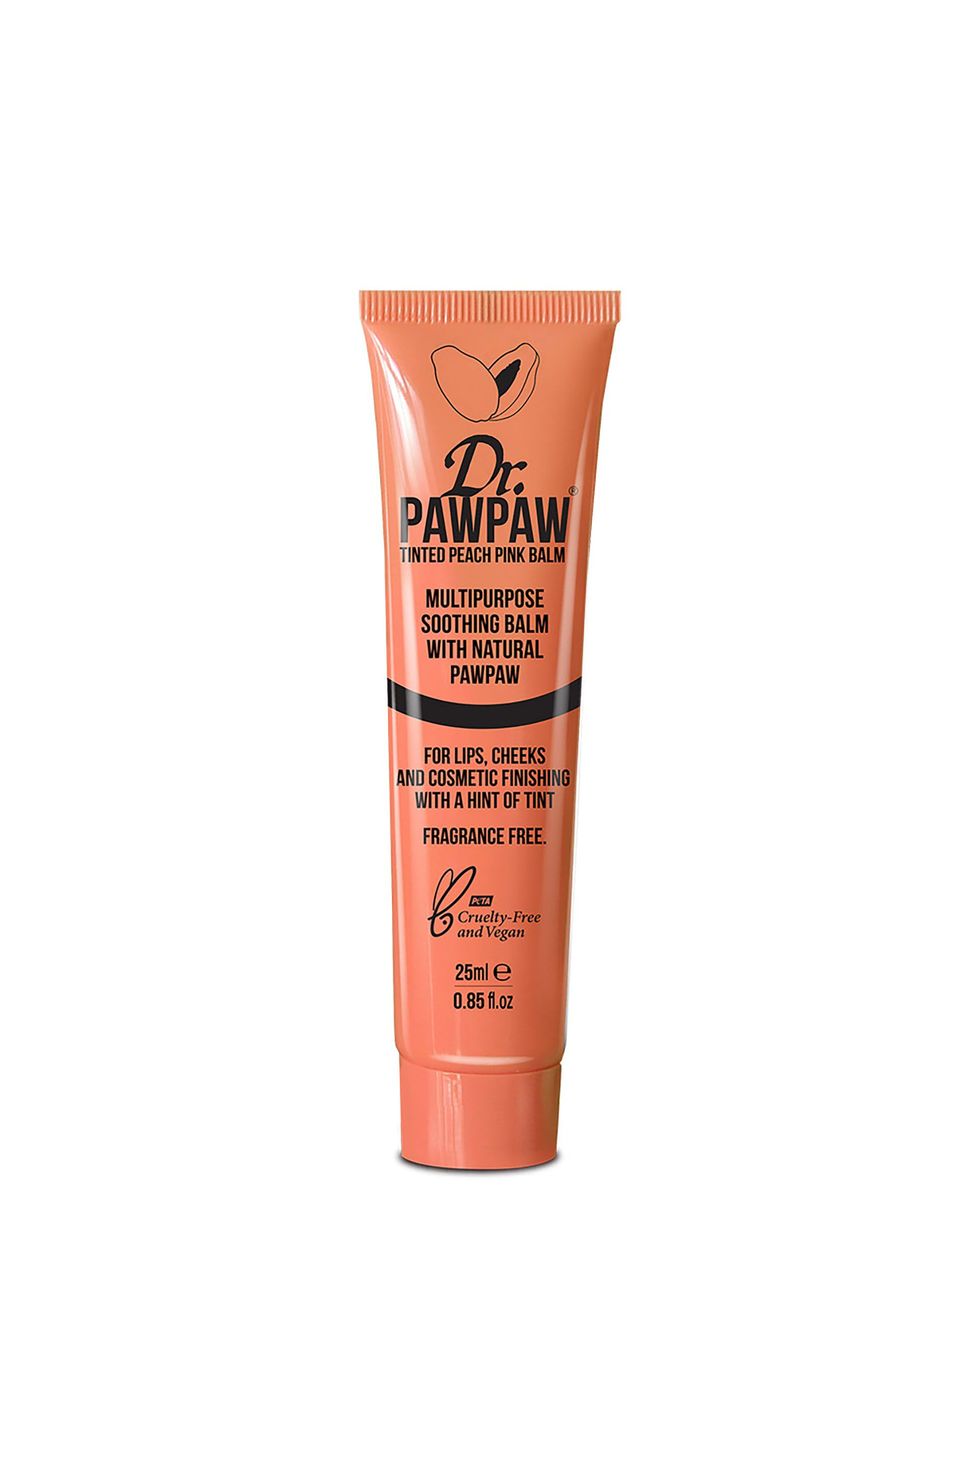 Dr. Pawpaw Tinted Multipurpose Soothing Balm in Peach Pink